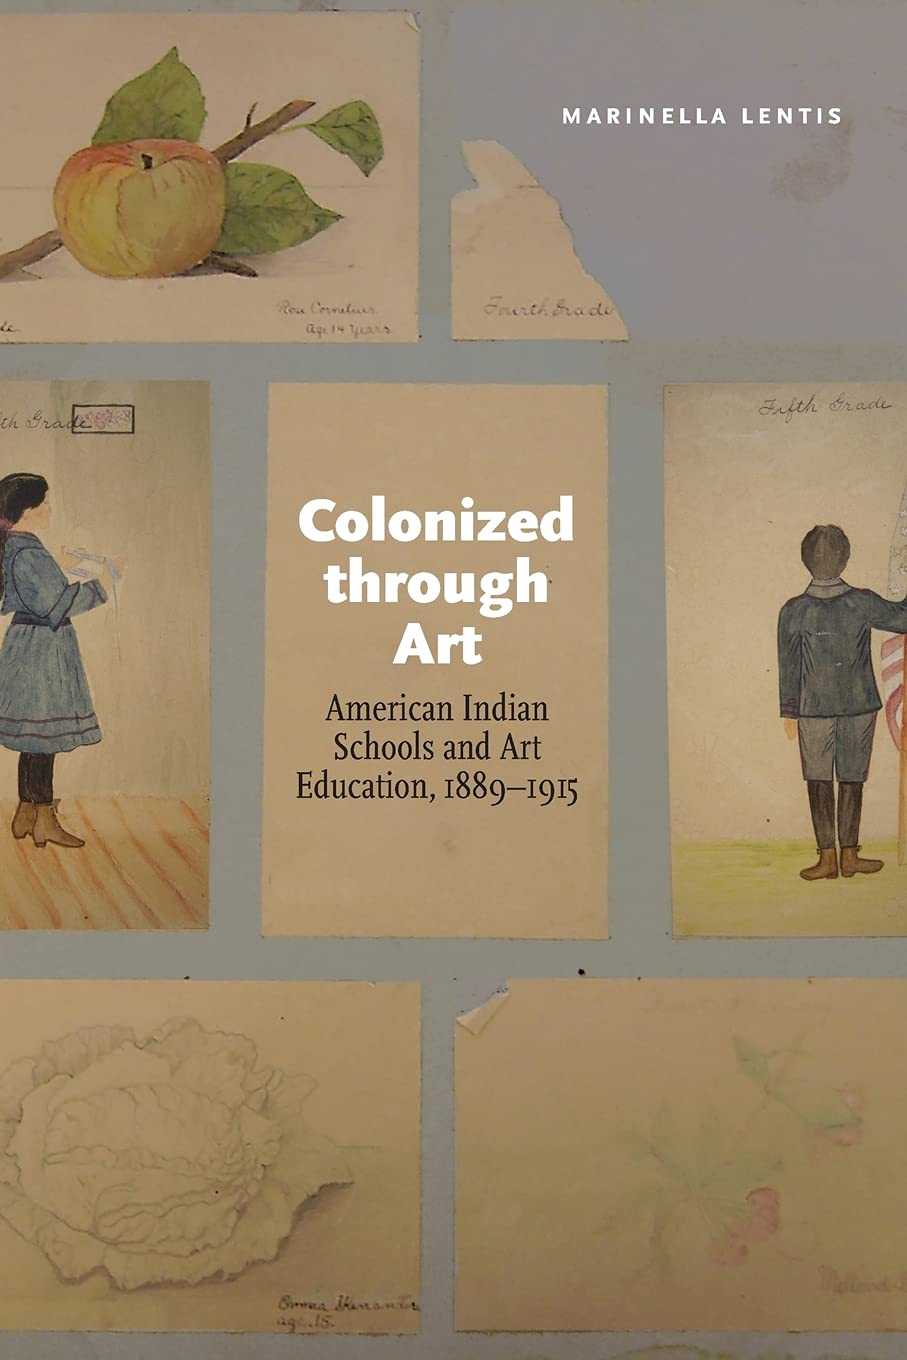 Colonized Through Art: American Indian Schools and Art Education, 1889-1915 by Marinella Lentis